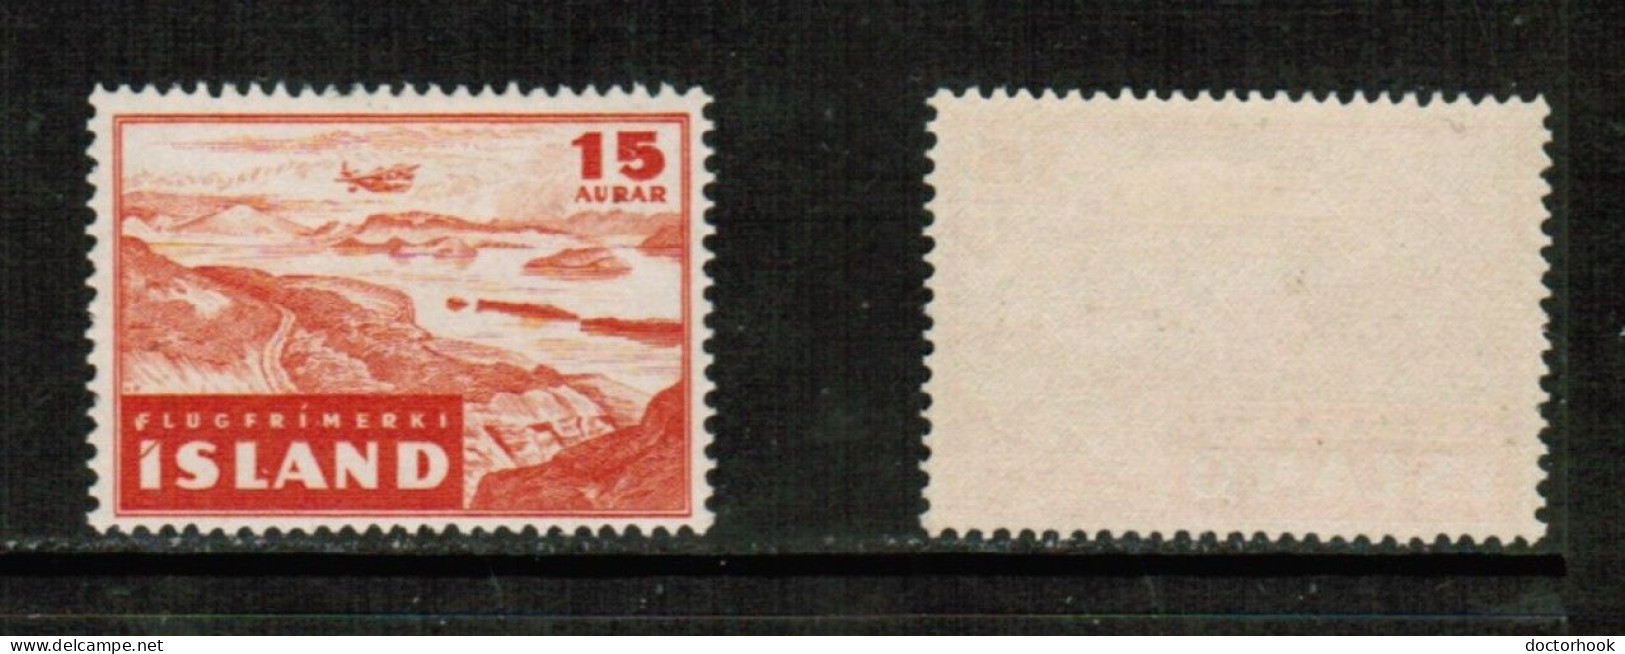 ICELAND   Scott # C 21* MINT LH (CONDITION AS PER SCAN) (Stamp Scan # 950-18) - Airmail